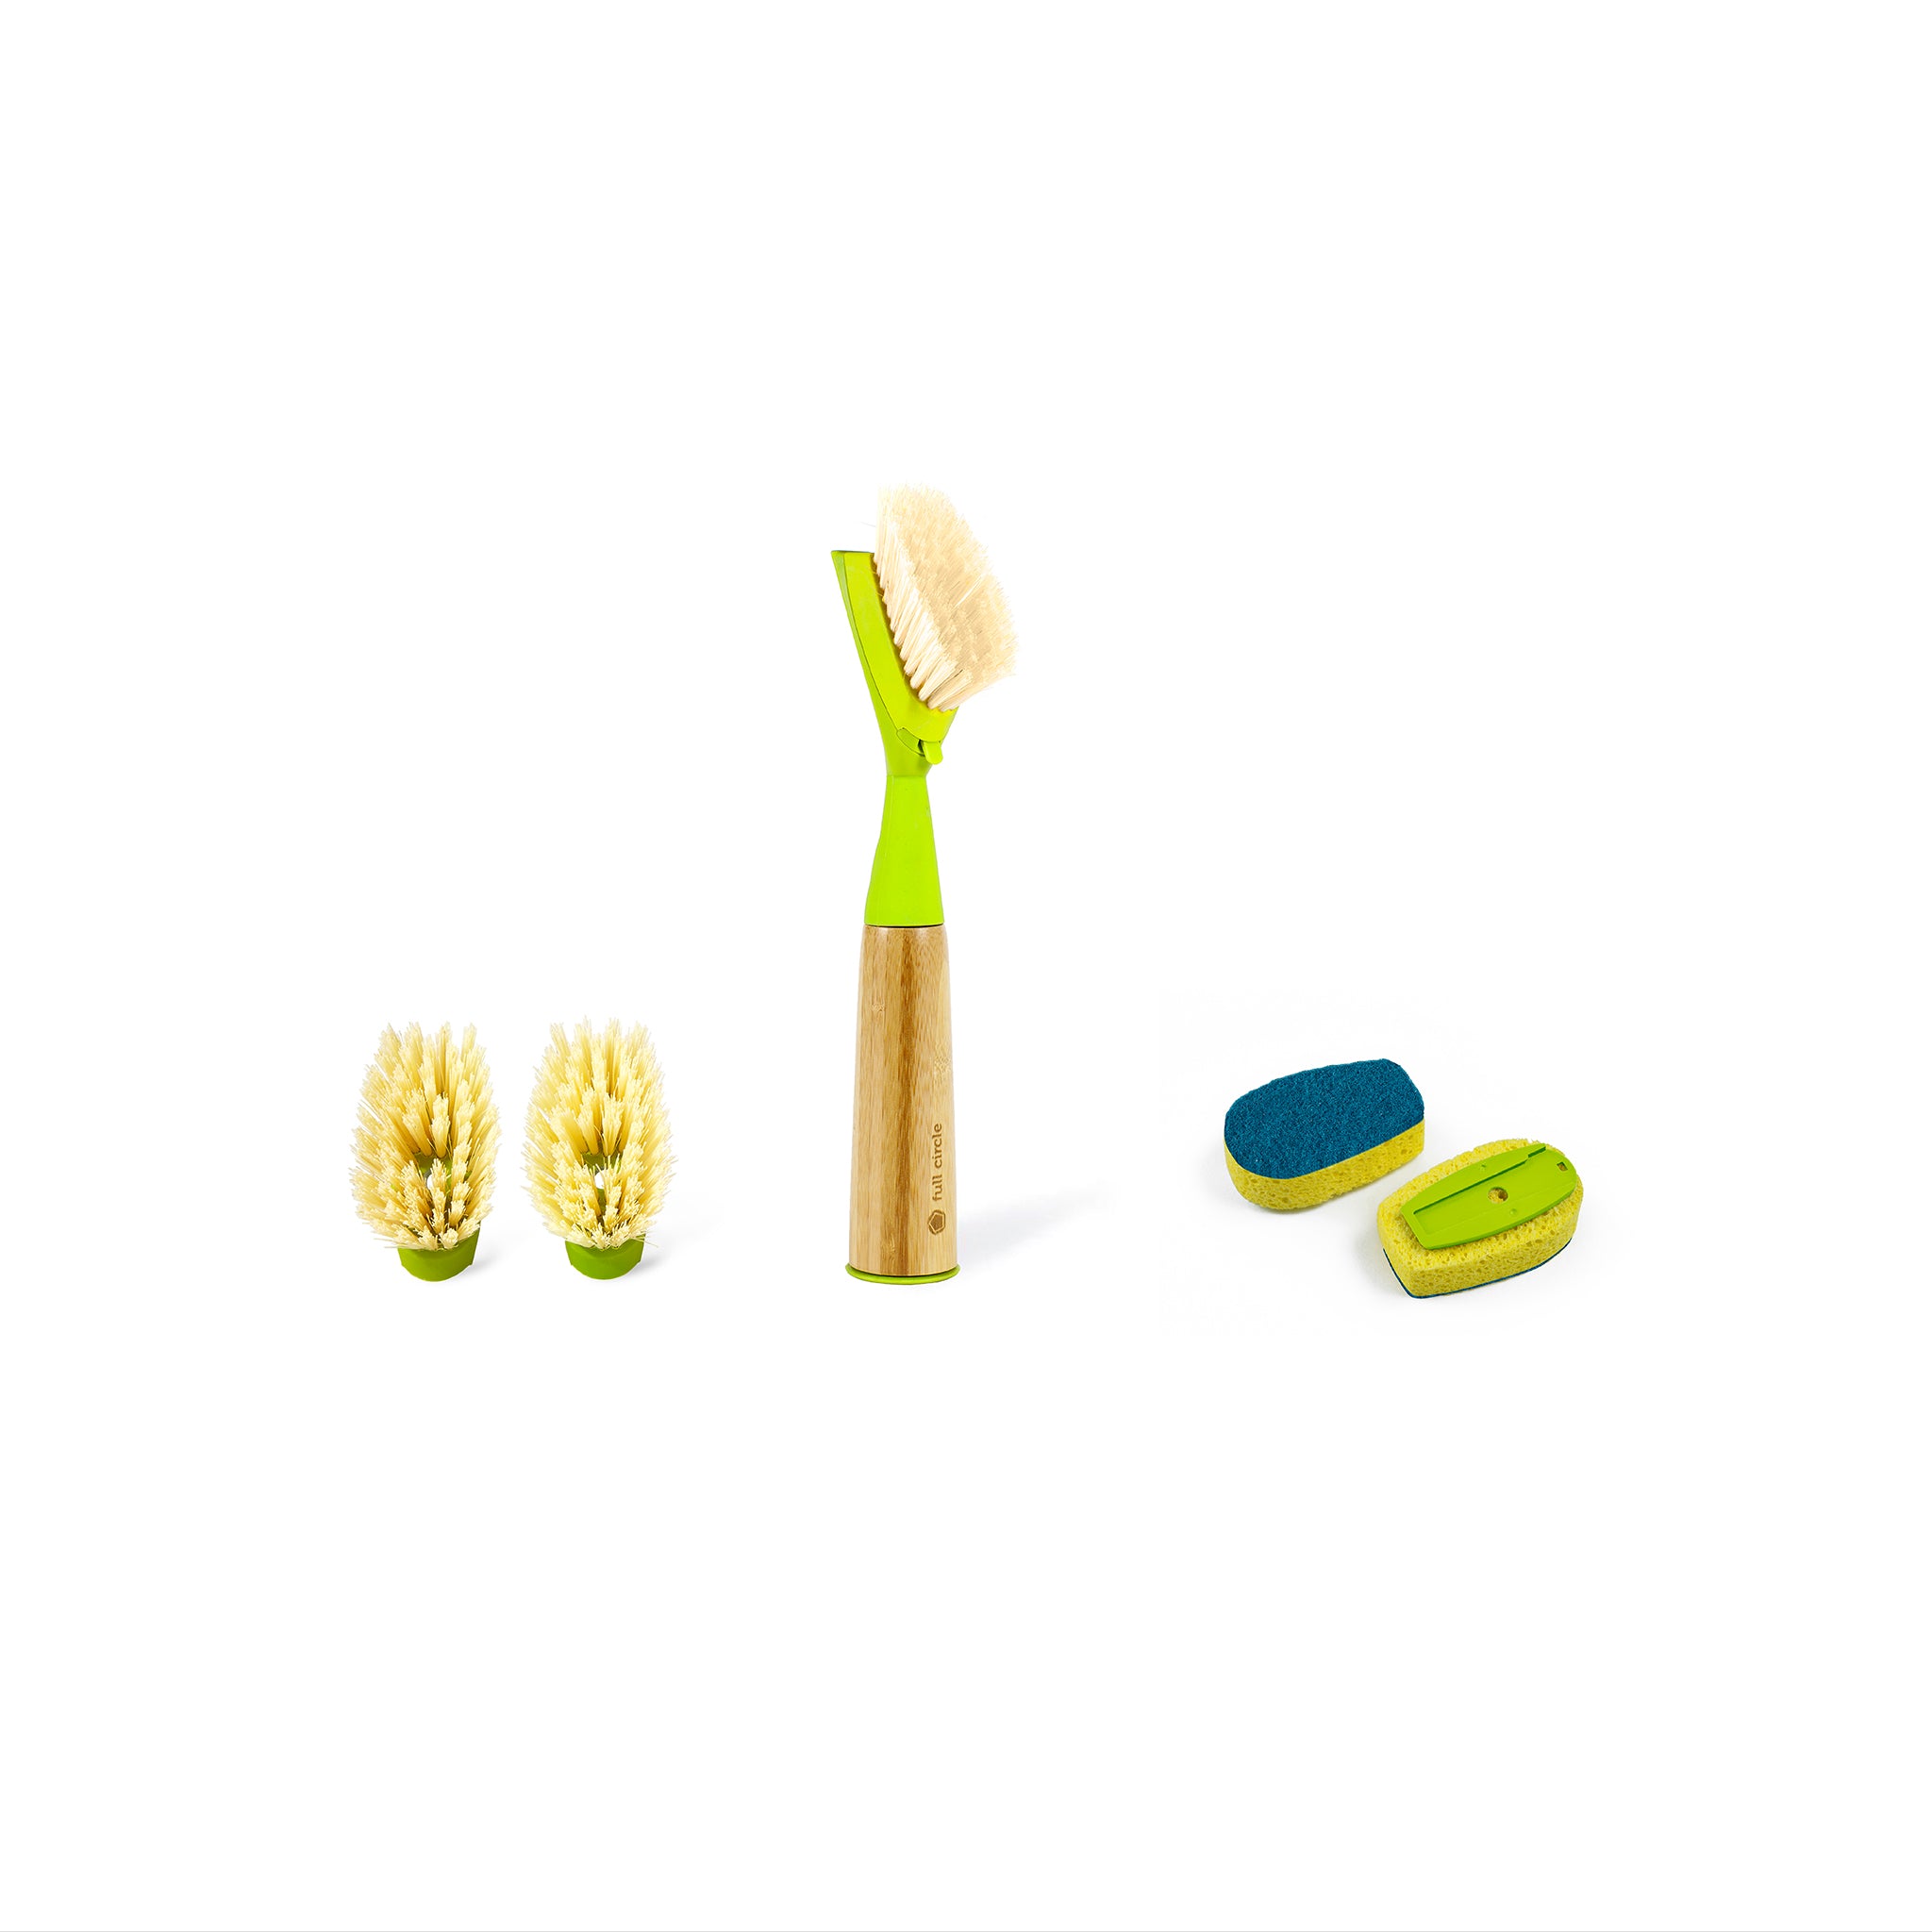 BIODEGRADABLE AND ECO-FRIENDLY MAGIC TOILET BRUSH